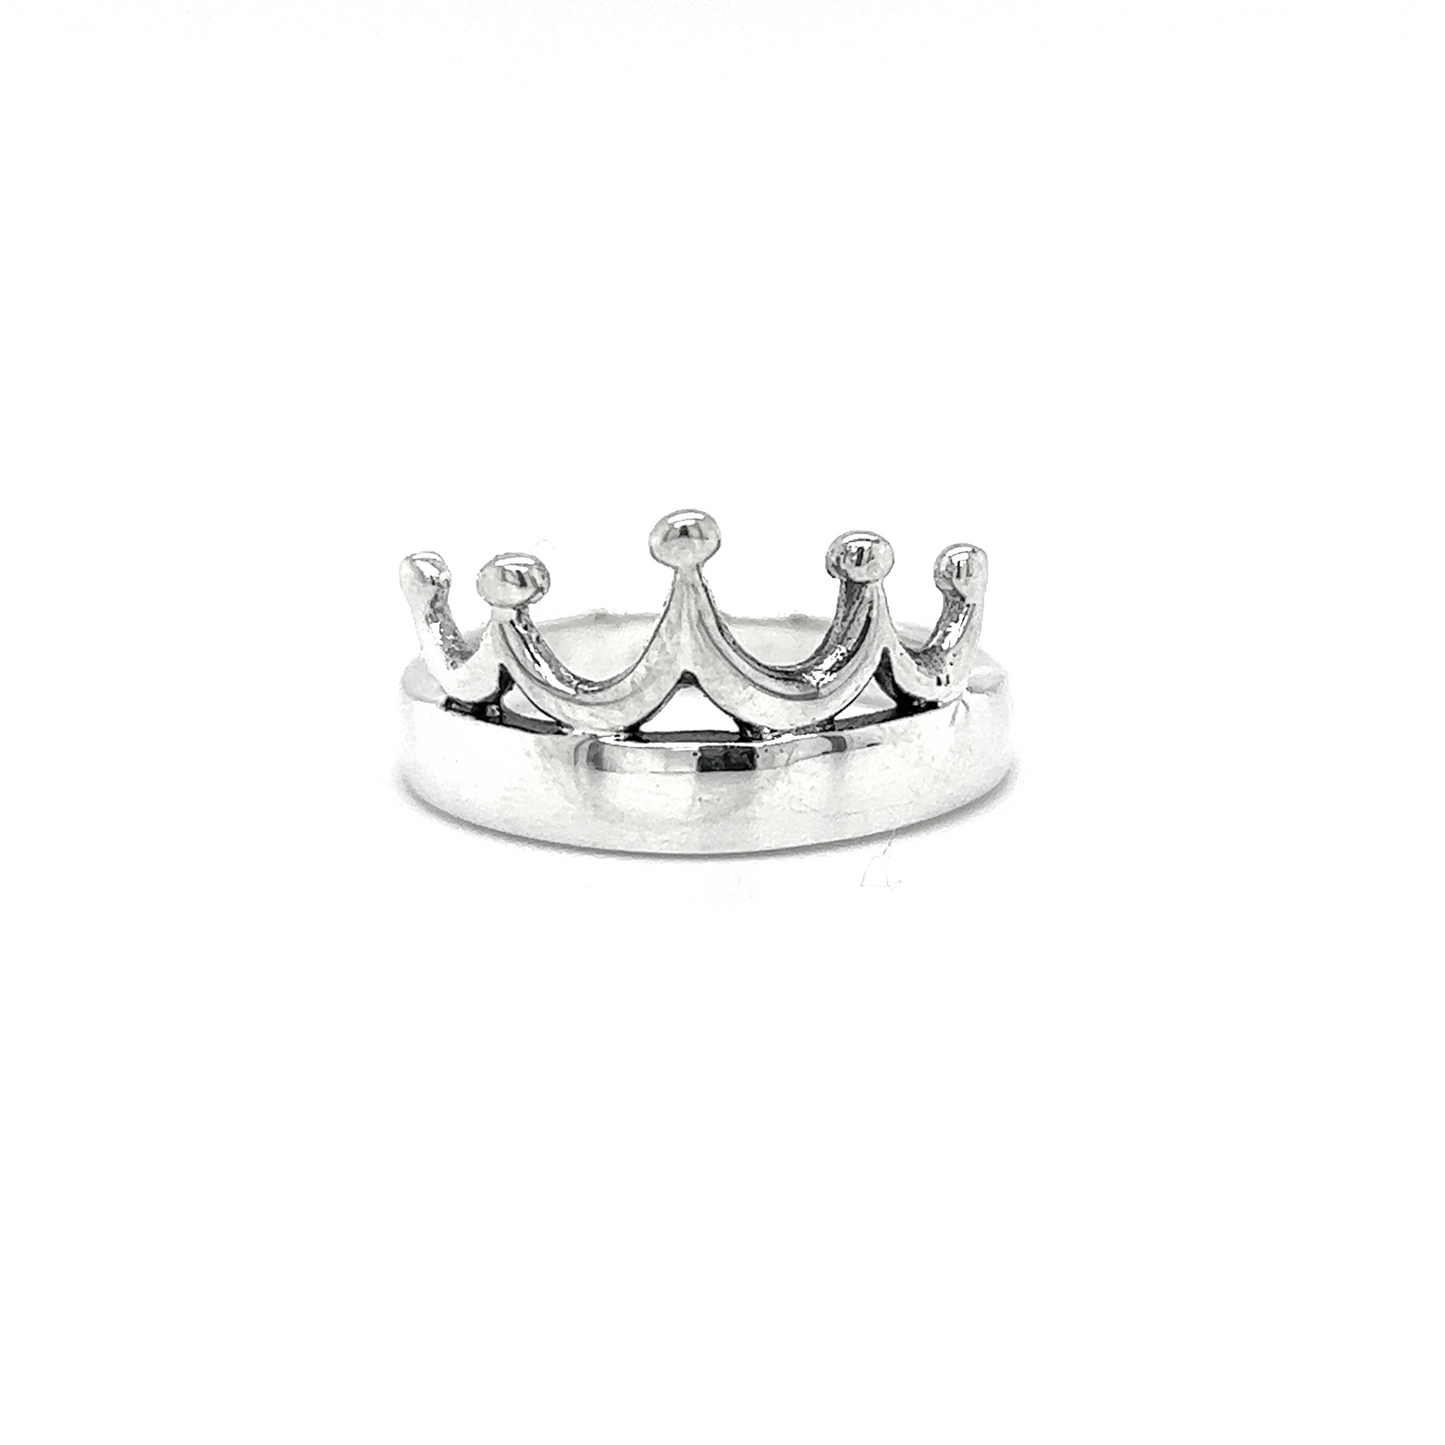 A Sleek Crown Ring from Super Silver on a white background.